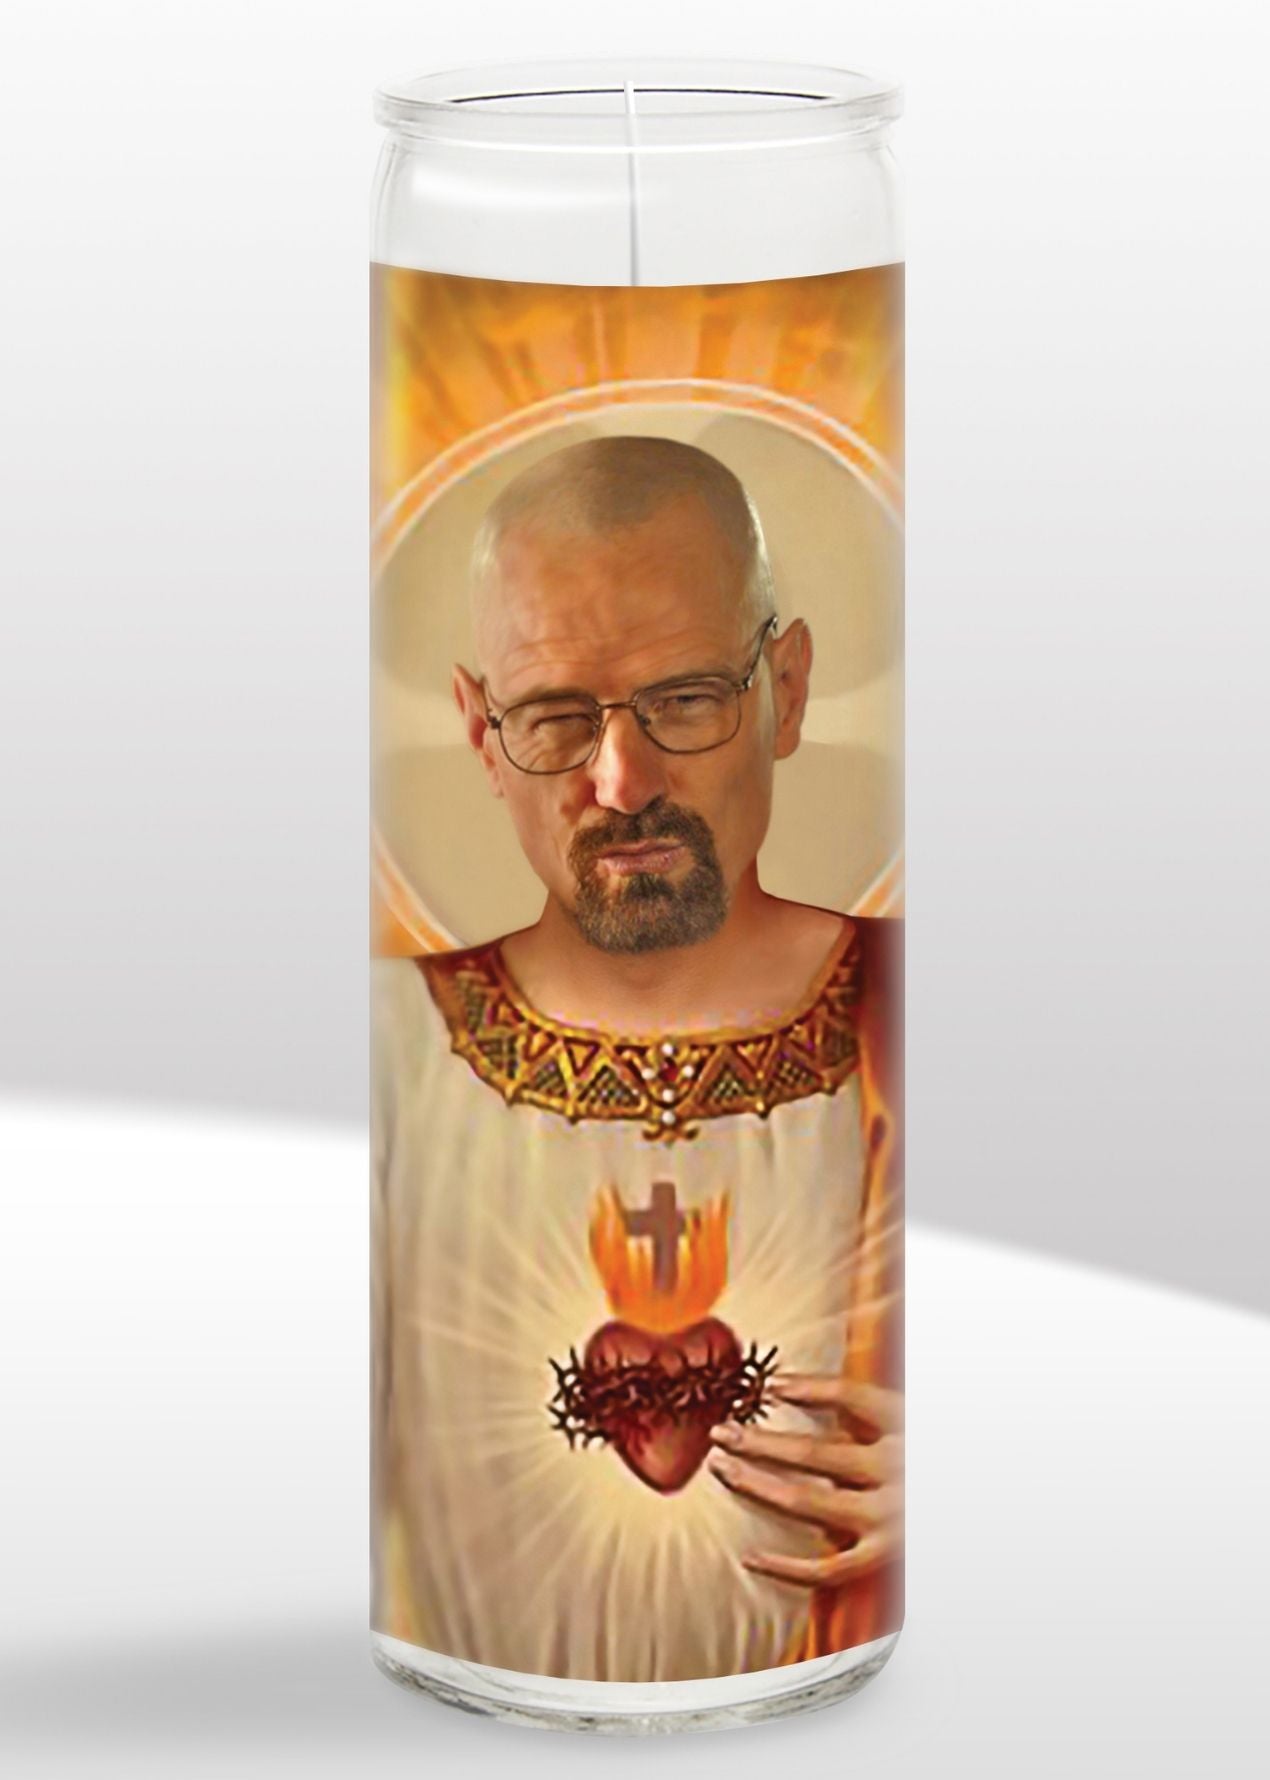 Walter White Candle